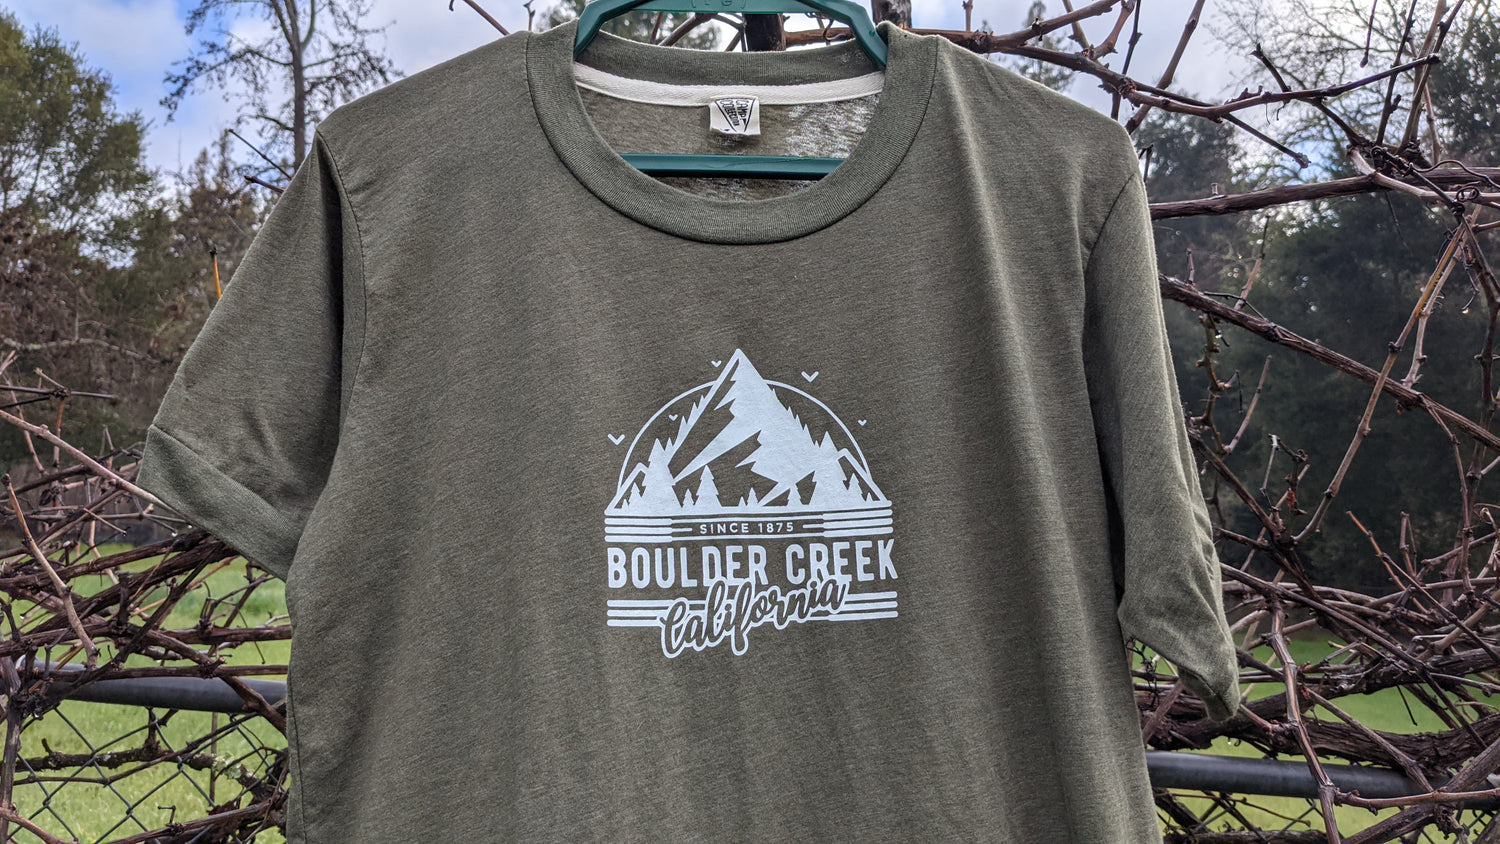 Olive Ringer tee by Camp Collection with Boulder Creek California design on front in white